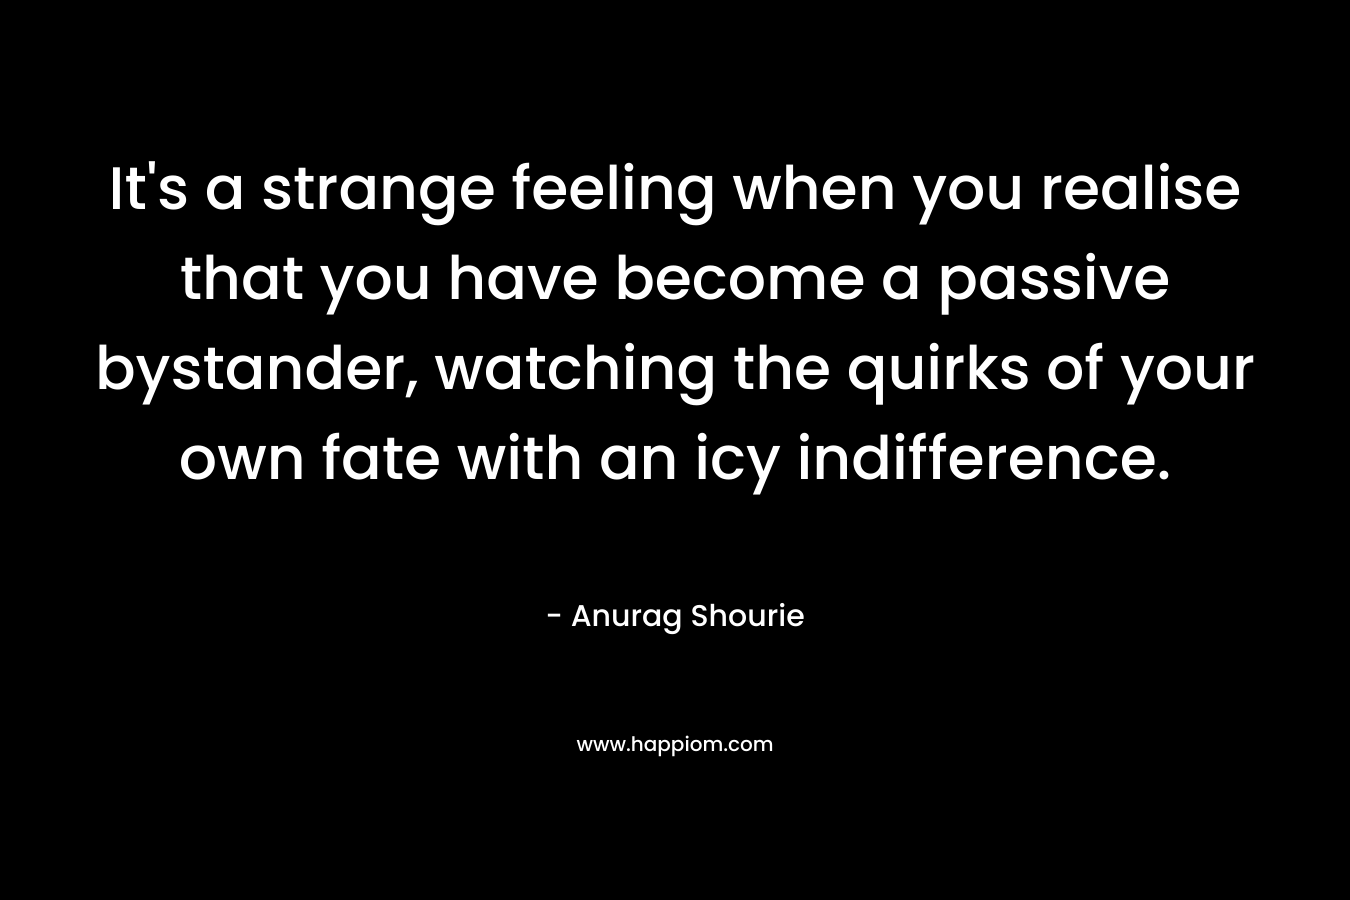 It’s a strange feeling when you realise that you have become a passive bystander, watching the quirks of your own fate with an icy indifference. – Anurag Shourie